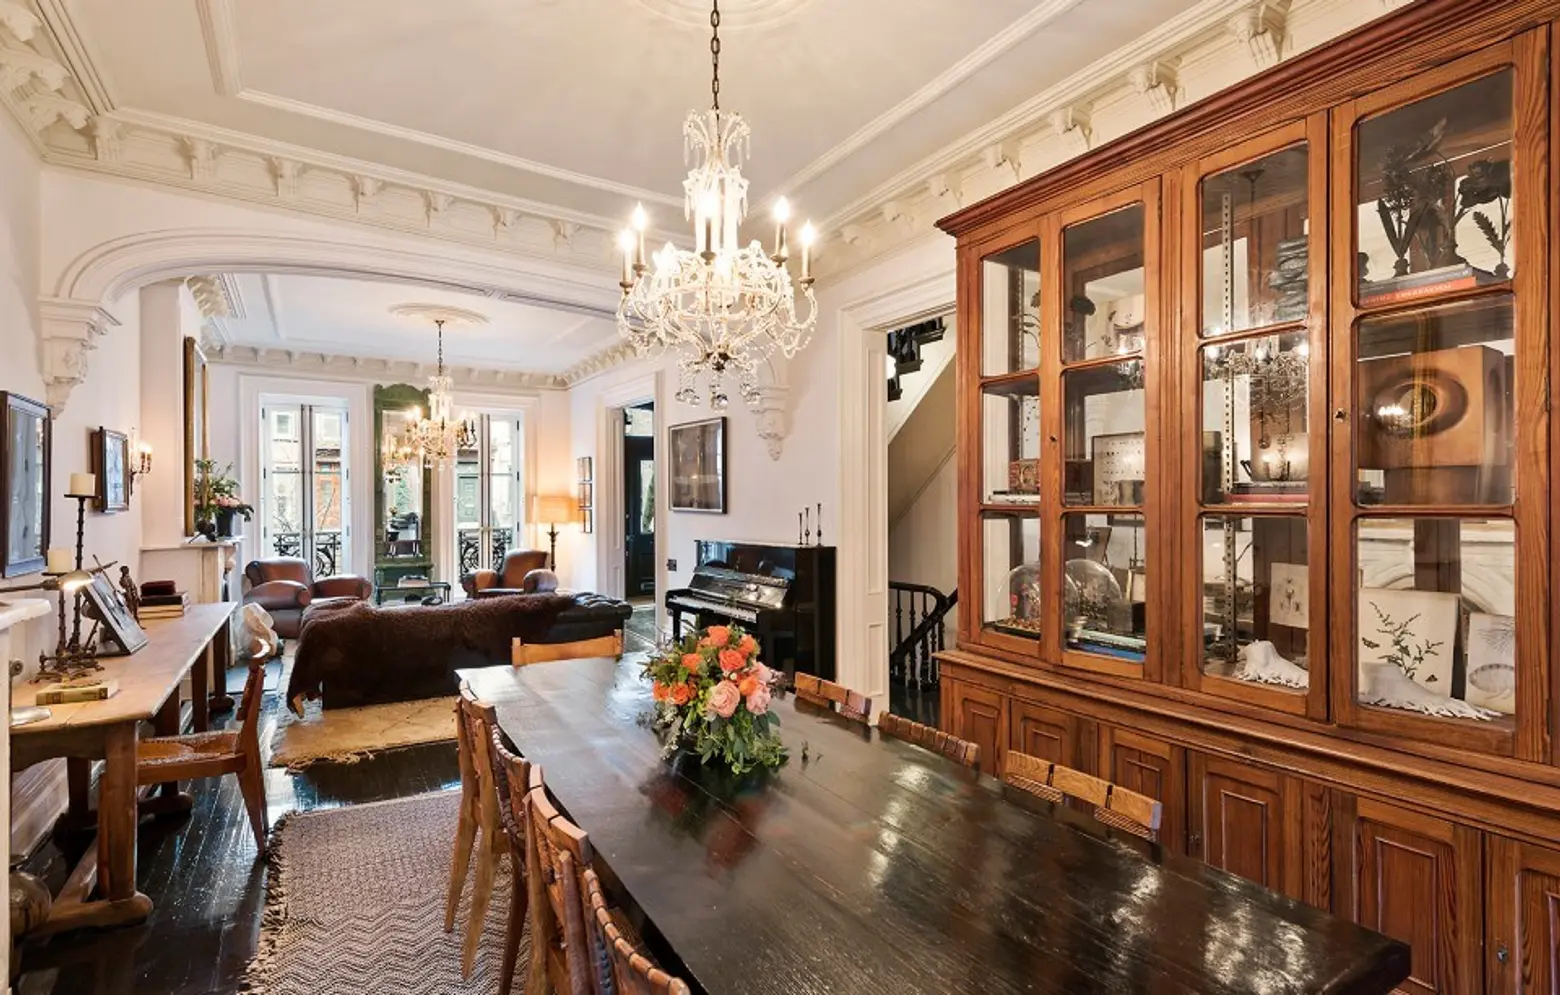 178 Garfield Place, Vince Clarke, Jenna Lyons, Tracy Martin, Morbid Anatomy Museum, Roman and Williams, townhouse, Park Slope, brownstone, outdoor space, interiors